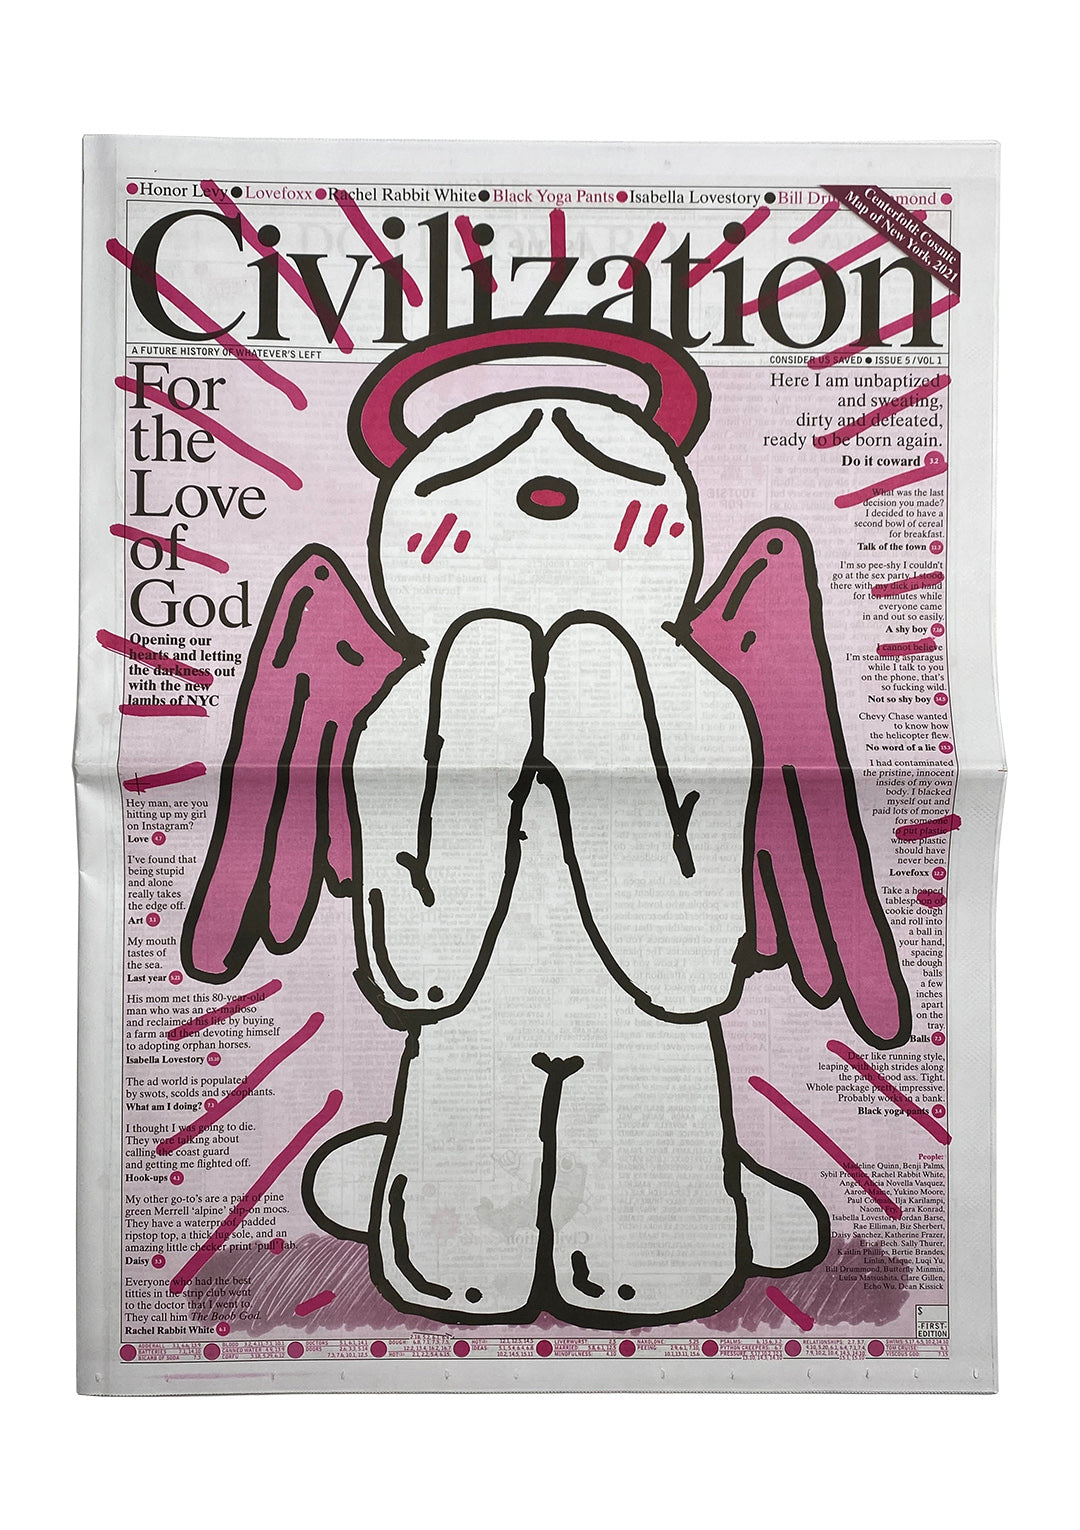 CIVILIZATION ISSUE #5: For the Love of God (Out of Print, Rare)